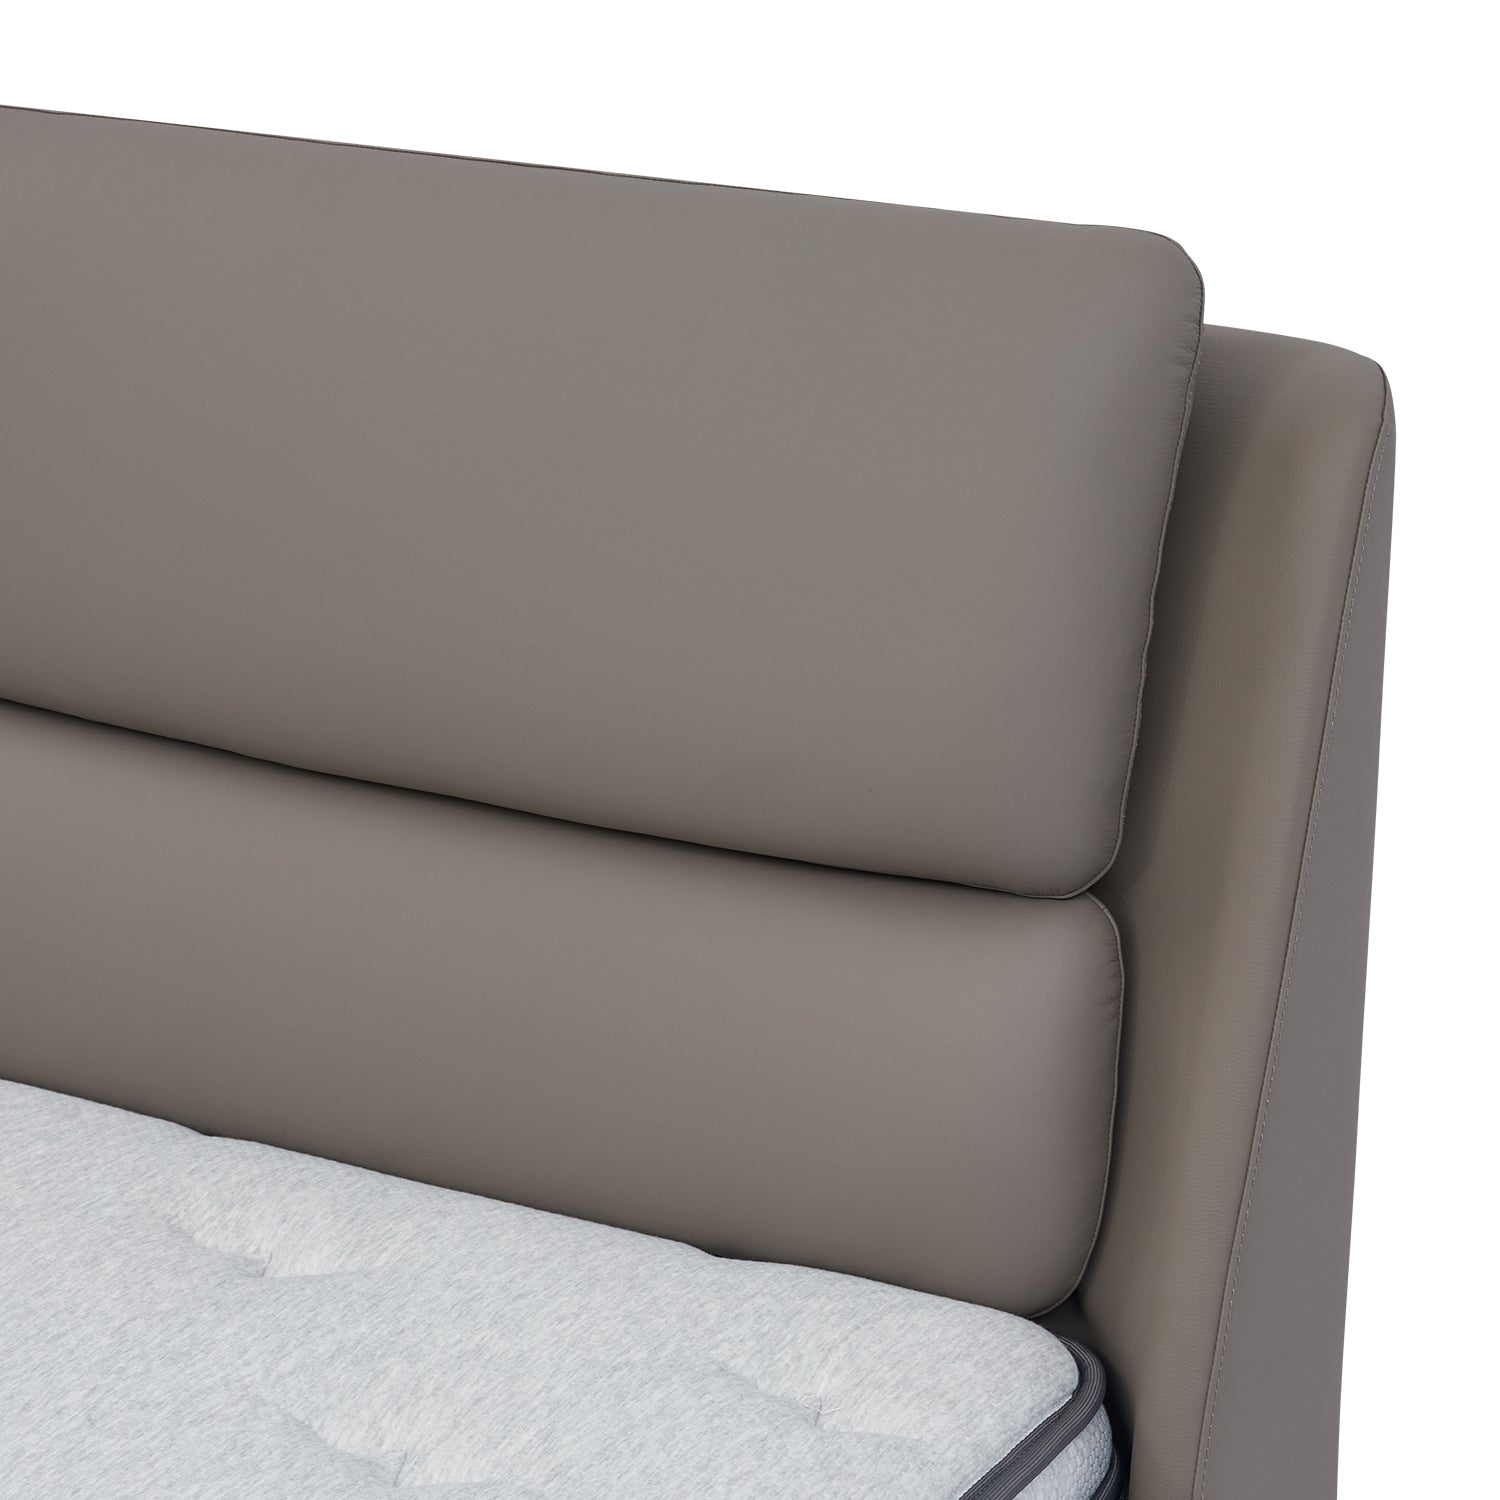 Close-up of Bed Frame BOC1 - 019 headboard with plush, light grey cushions and grey mattress from DeRUCCI